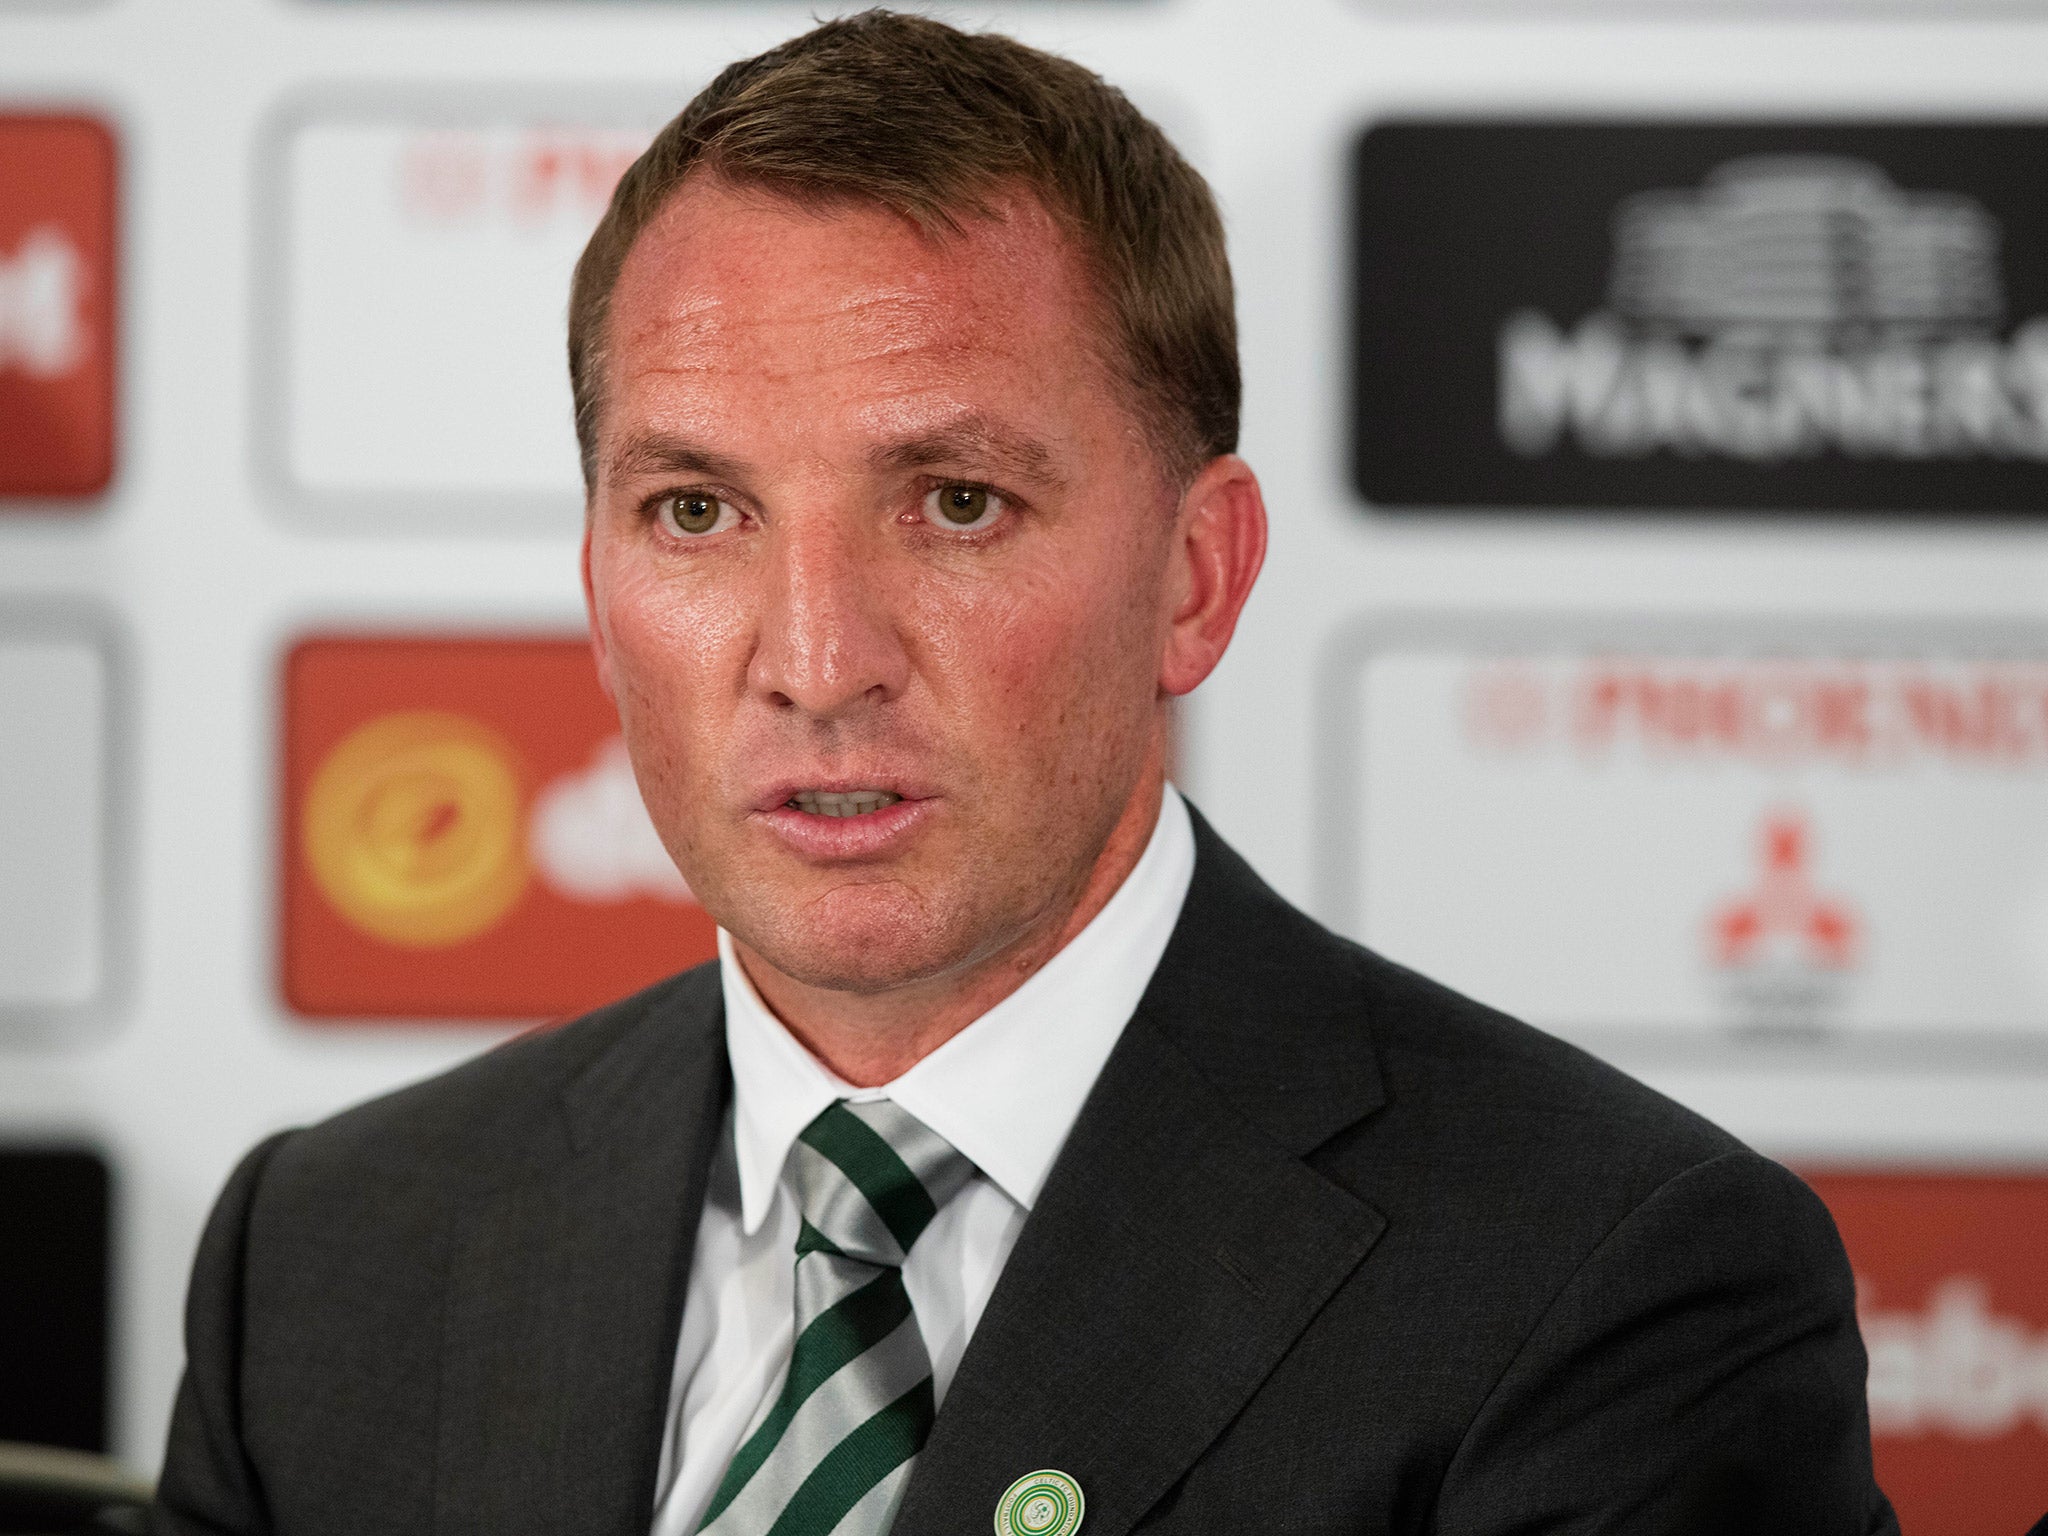 Brendan Rodgers has ruled himself out of the running to be England manager